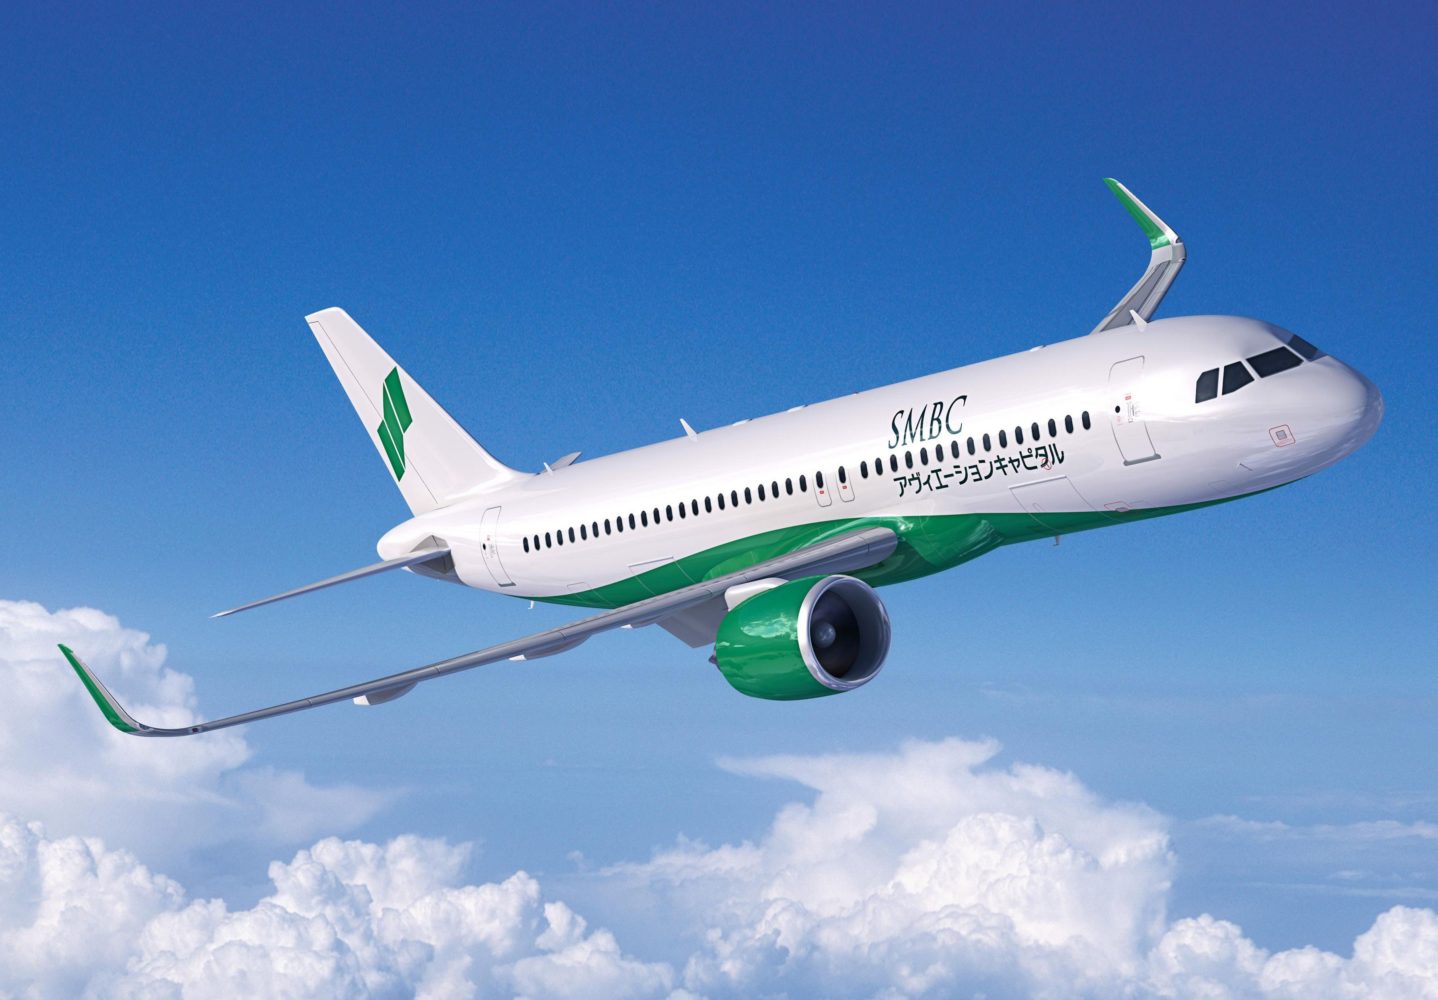 Airbus secures order for 65 A320neo aircraft